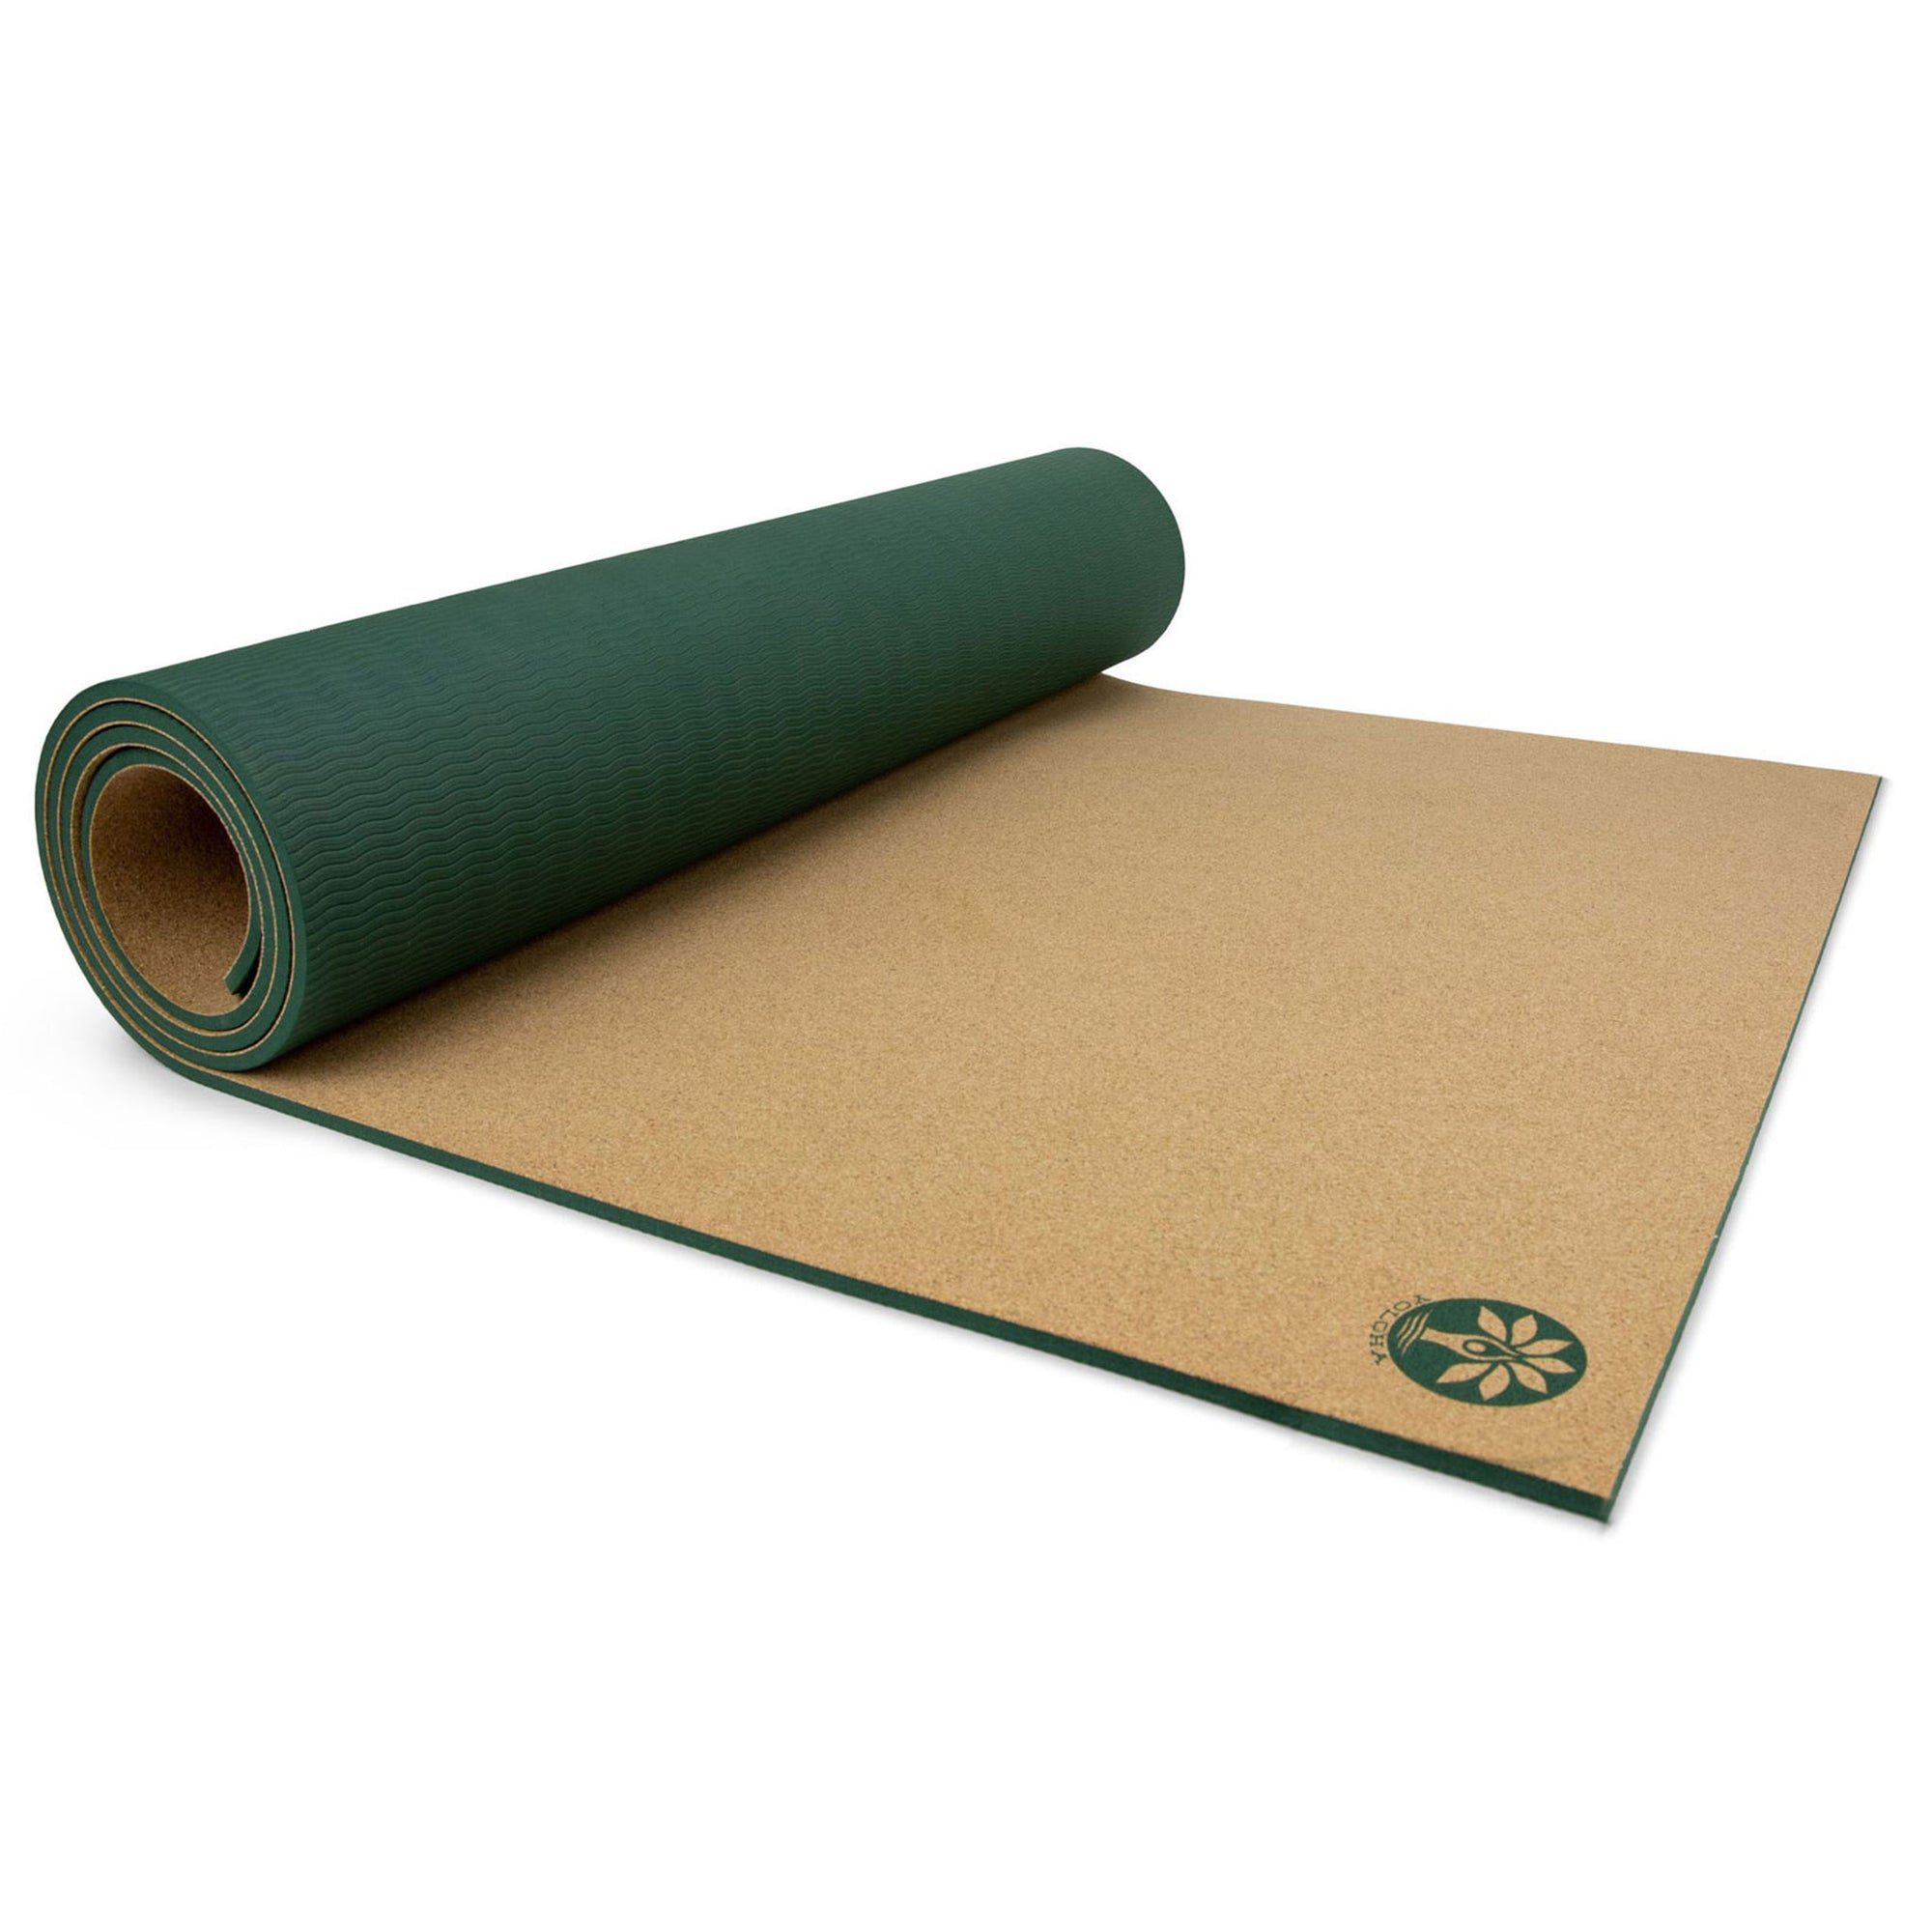 Extra Large Yoga Mats, Perfect for Taller Yogis